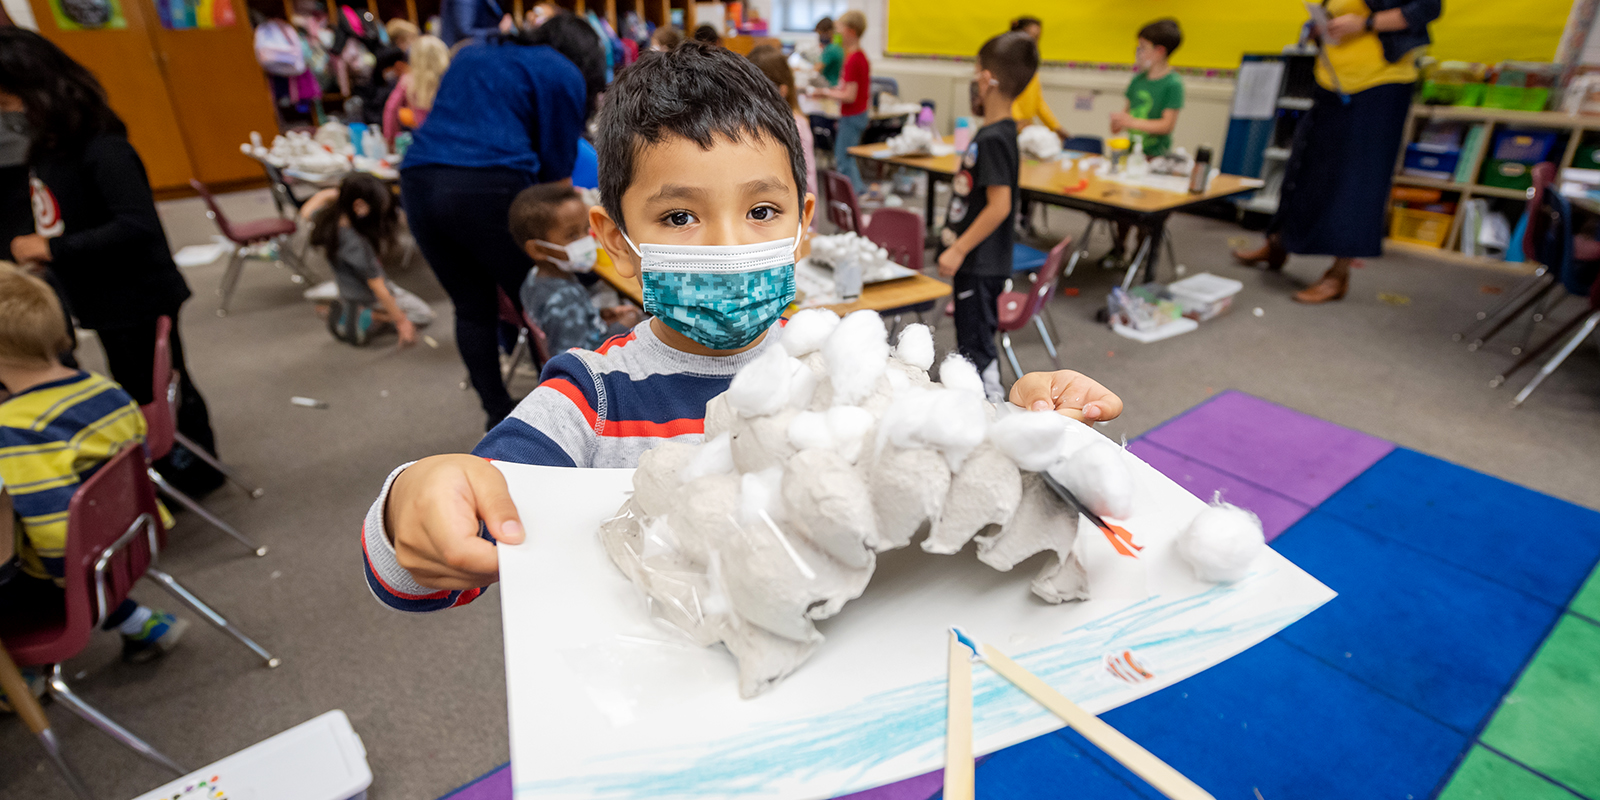 A Kindergarten student builds an igloo from an egg crate and cotton balls during Innovation Hour.